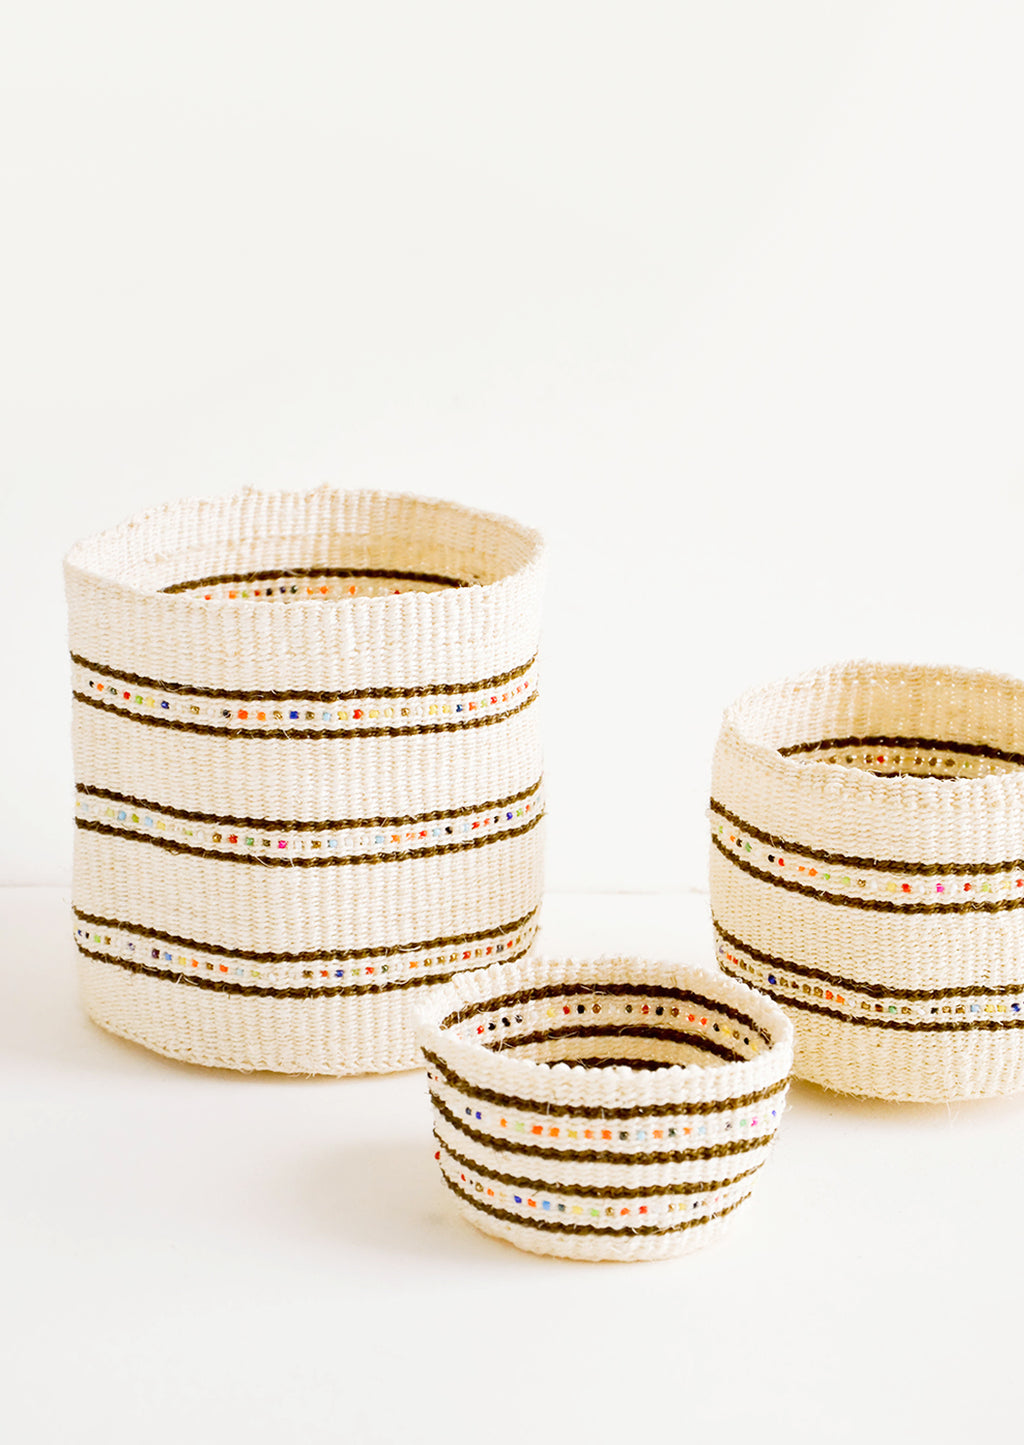 Small: Natural sisal grass baskets in incremental sizes with stripes and rainbow beading